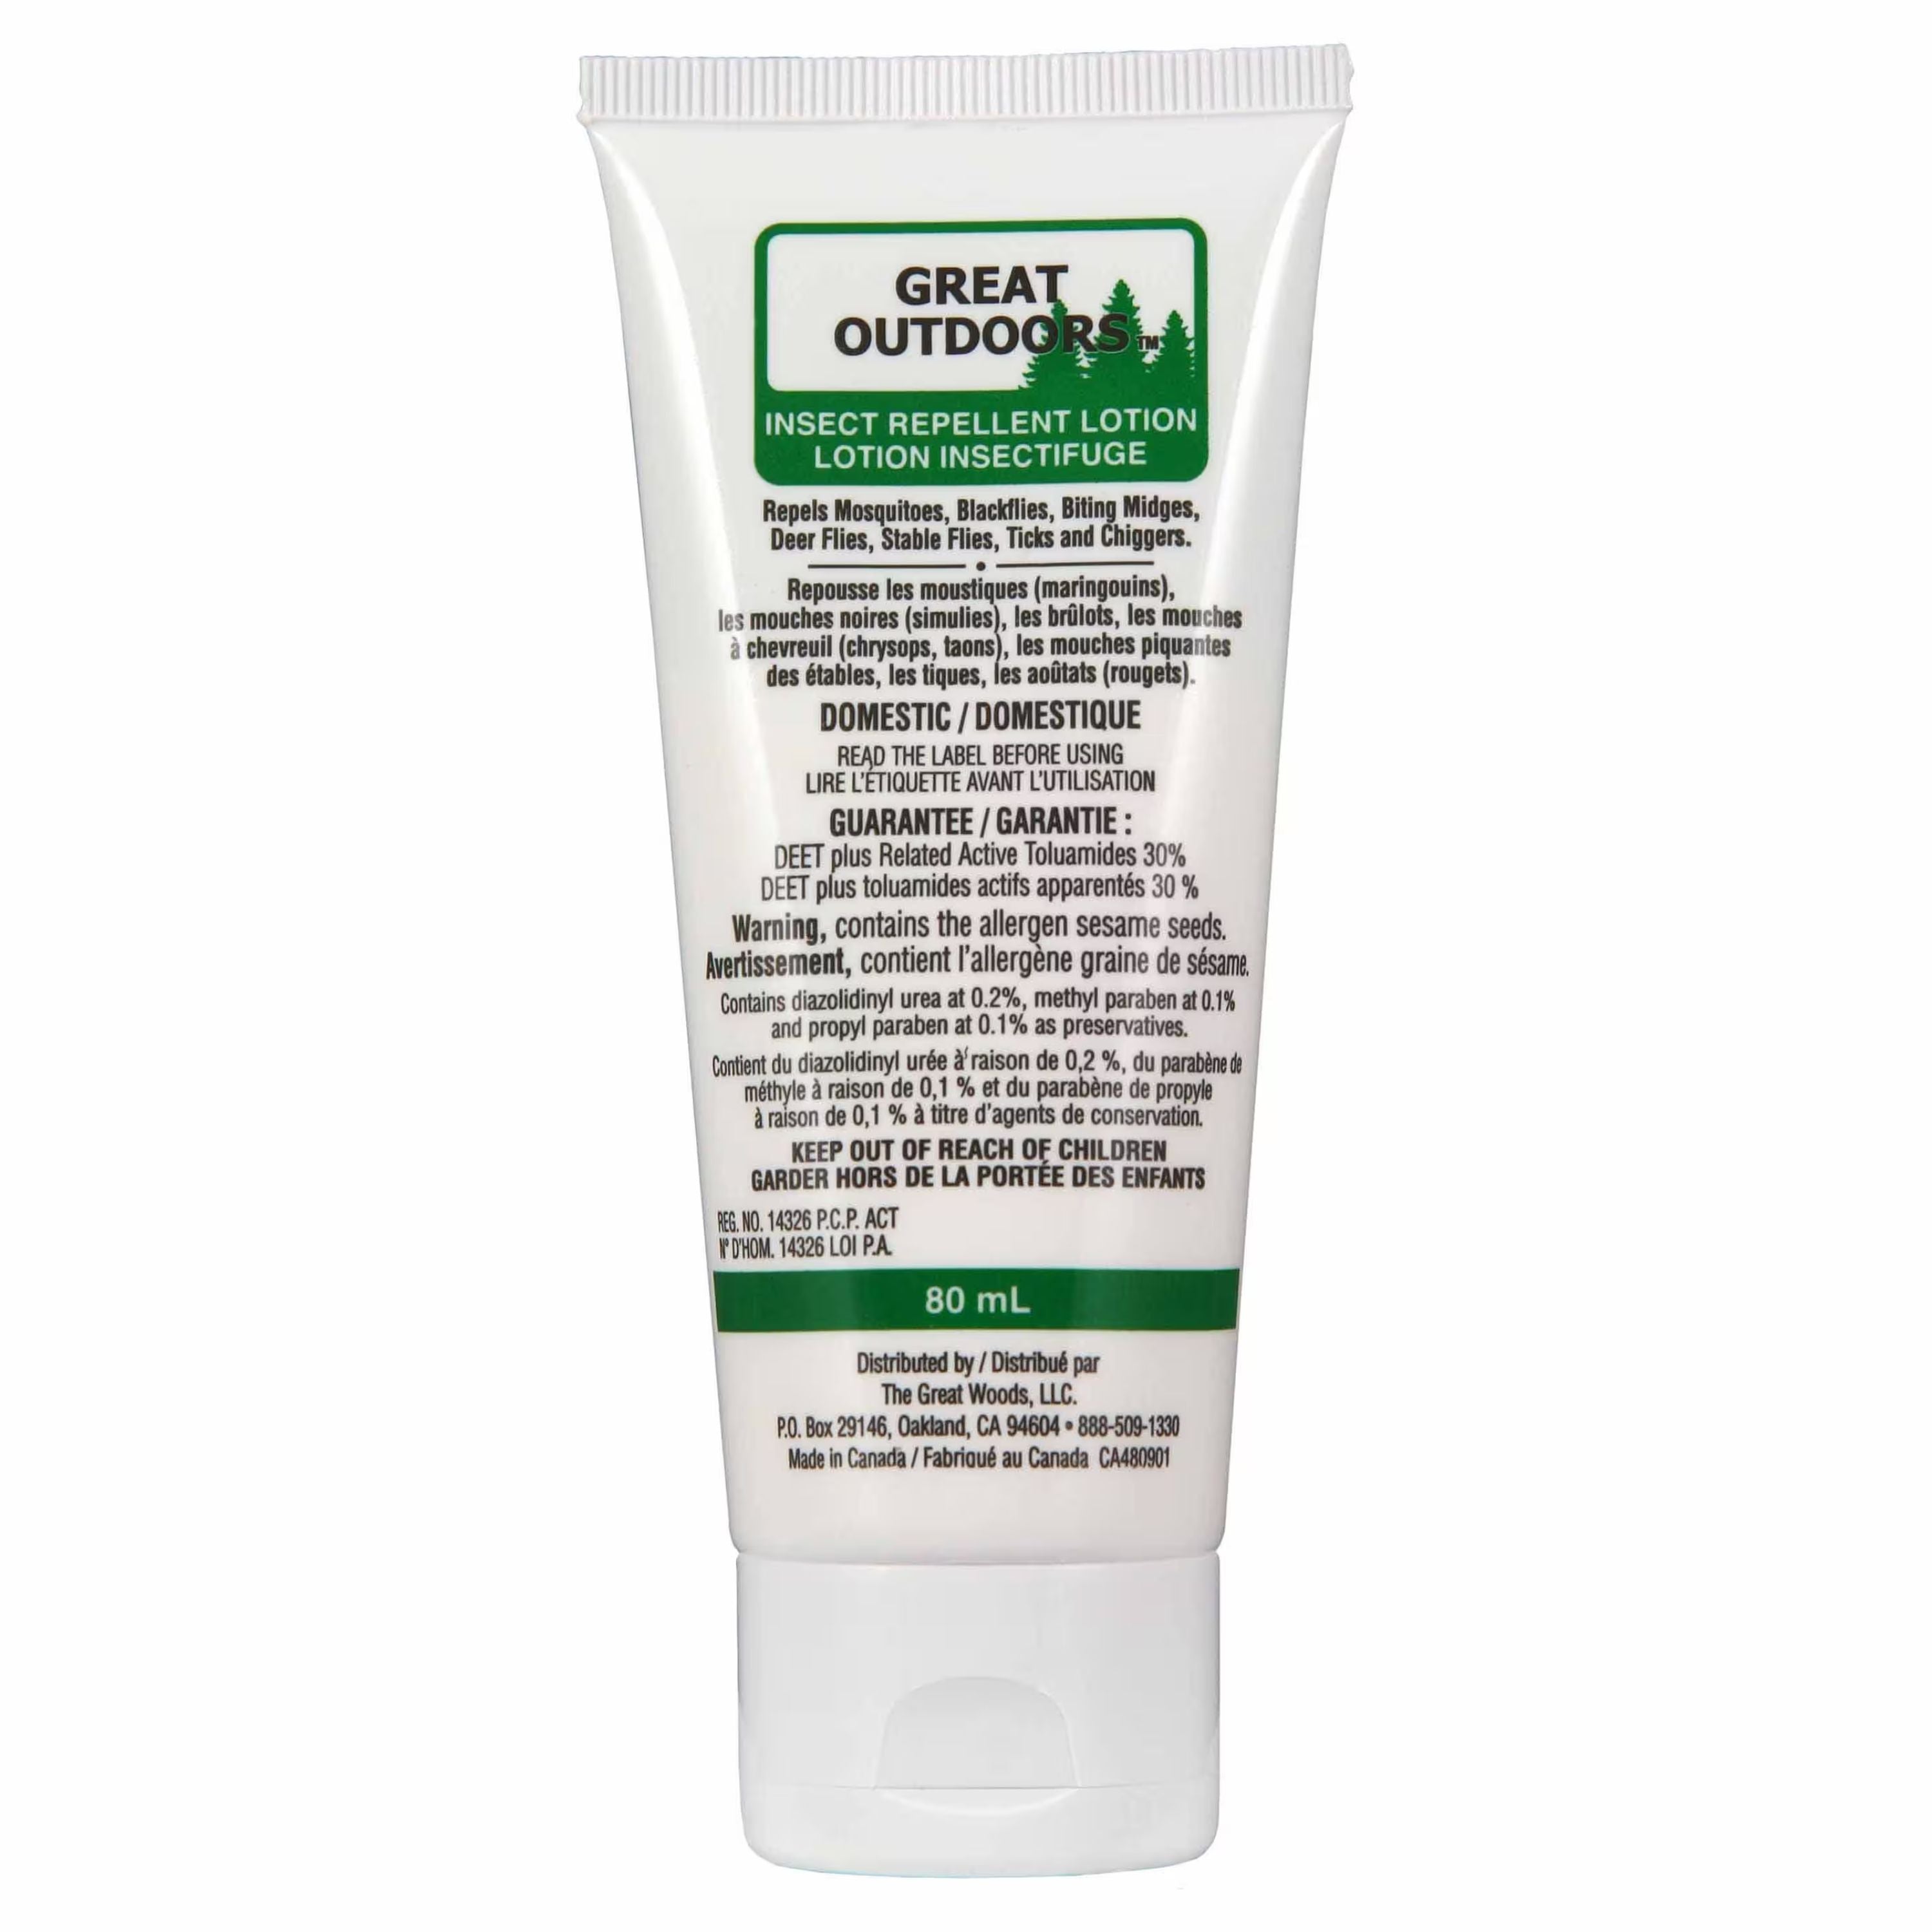 Lotion insect repellent - 30% deet